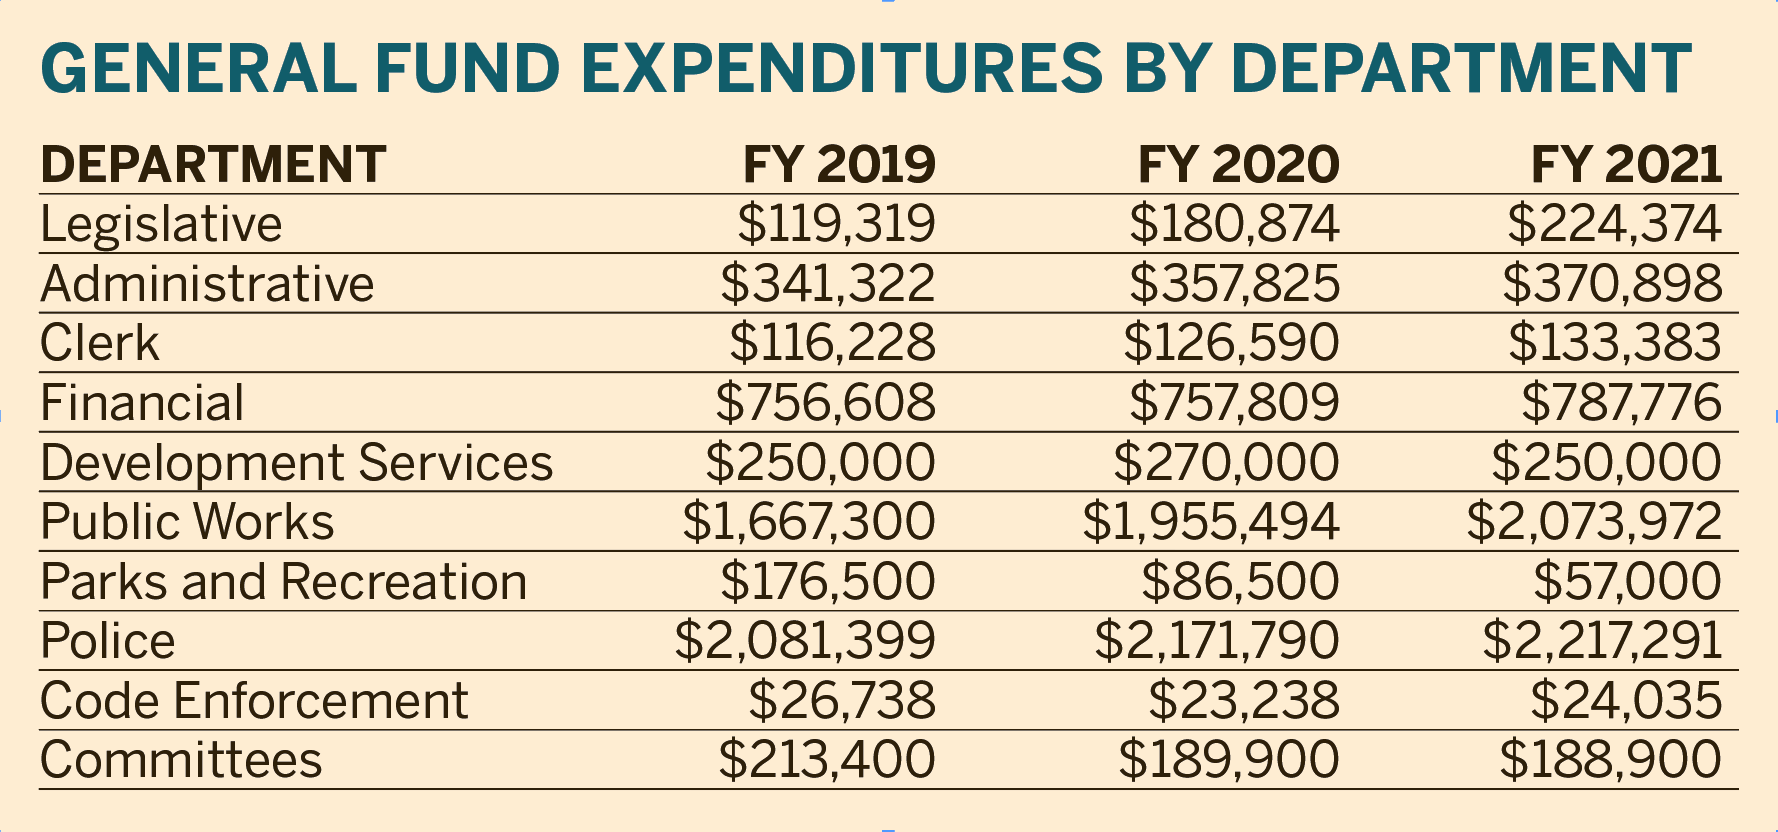 Here's a three-year comparison of General Fund expenditures by department.